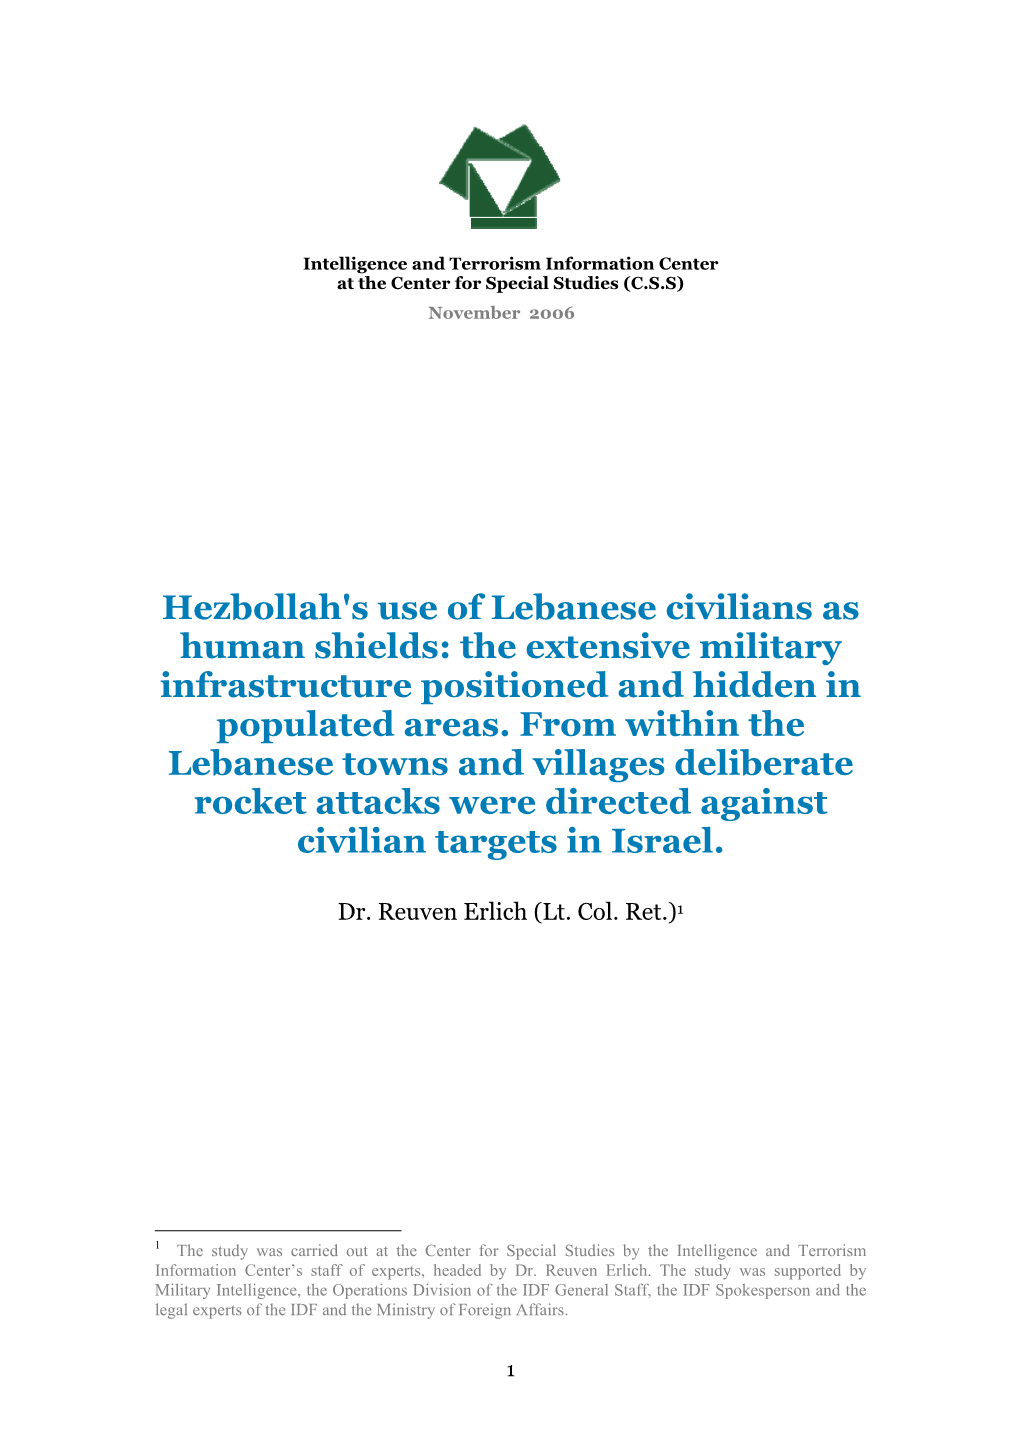 Hezbollah's Use of Lebanese Civilians As Human Shields: the Extensive Military Infrastructure Positioned and Hidden in Populated Areas